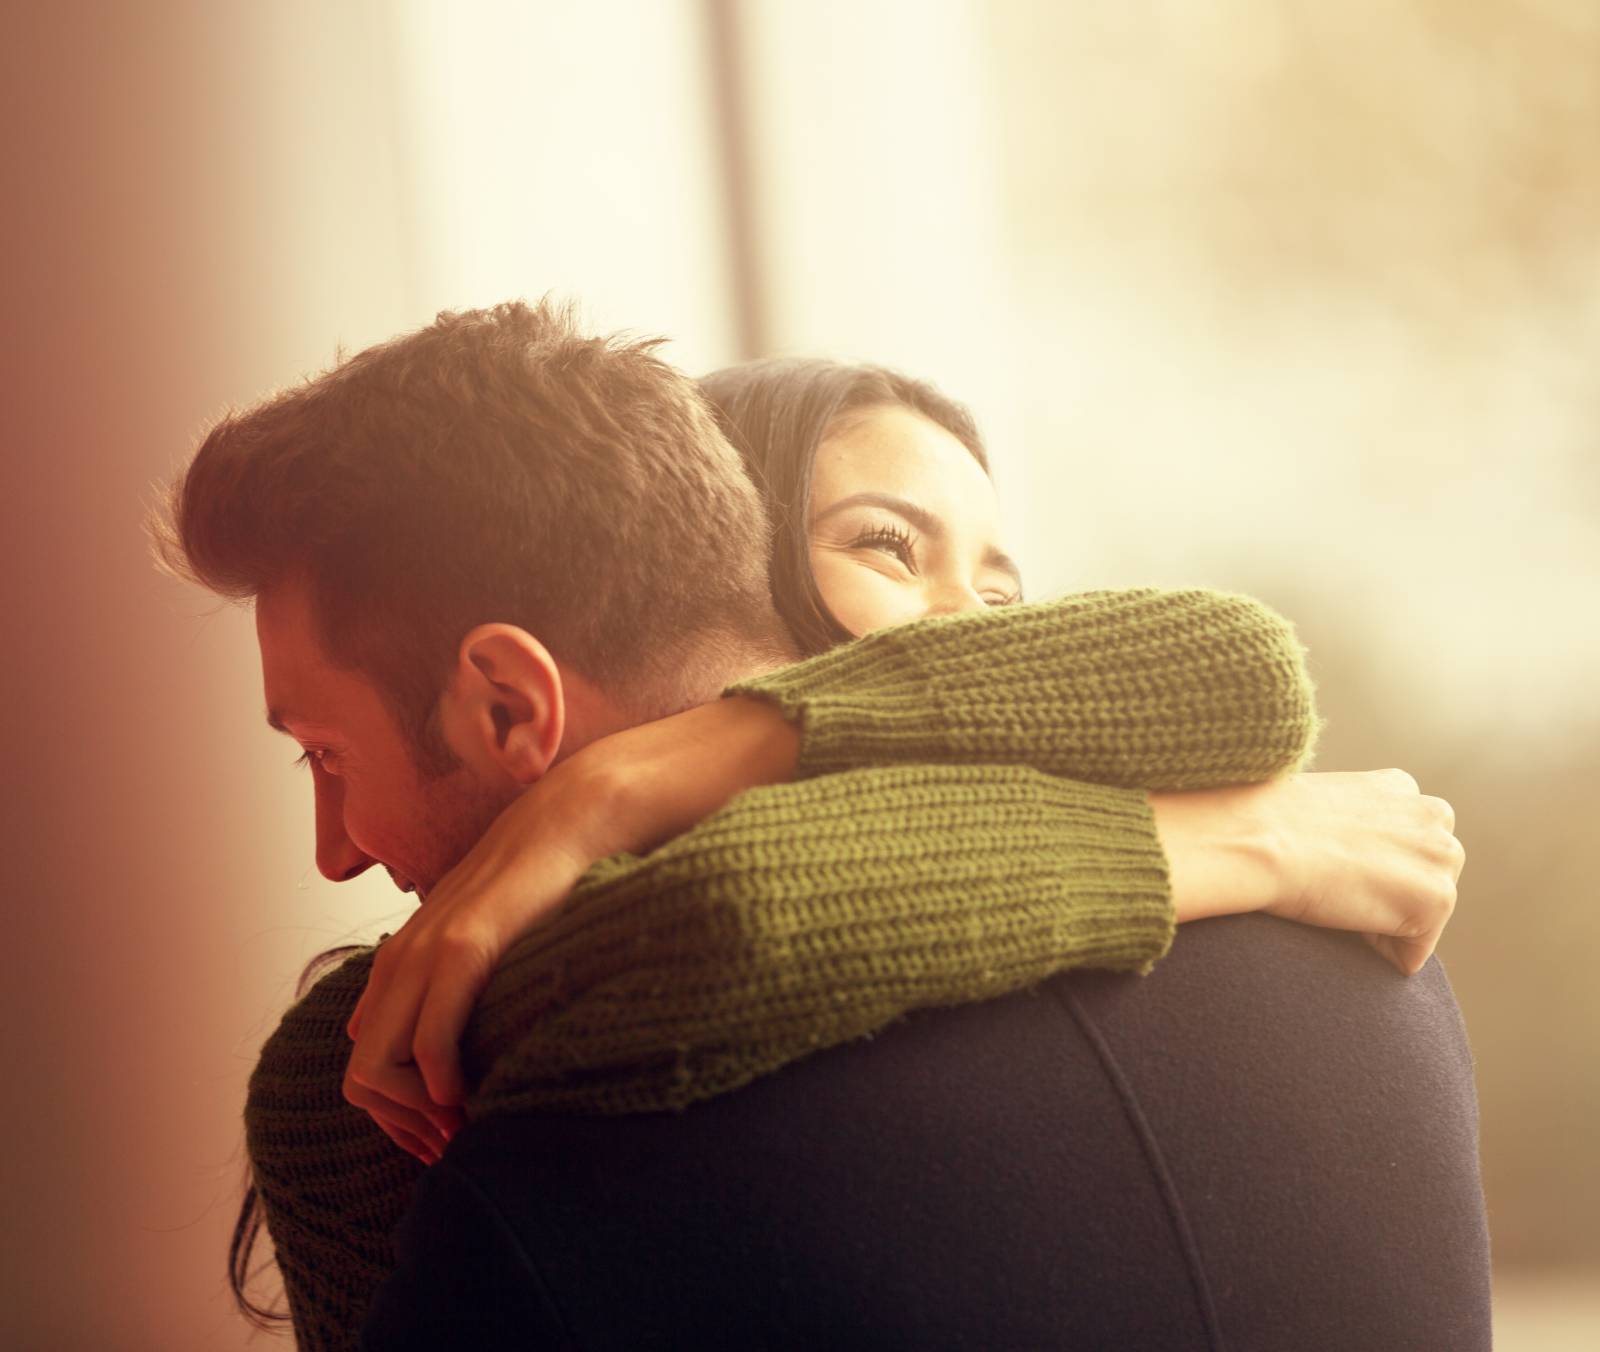 For women: It’s rough out there for our men – how do we offer support?